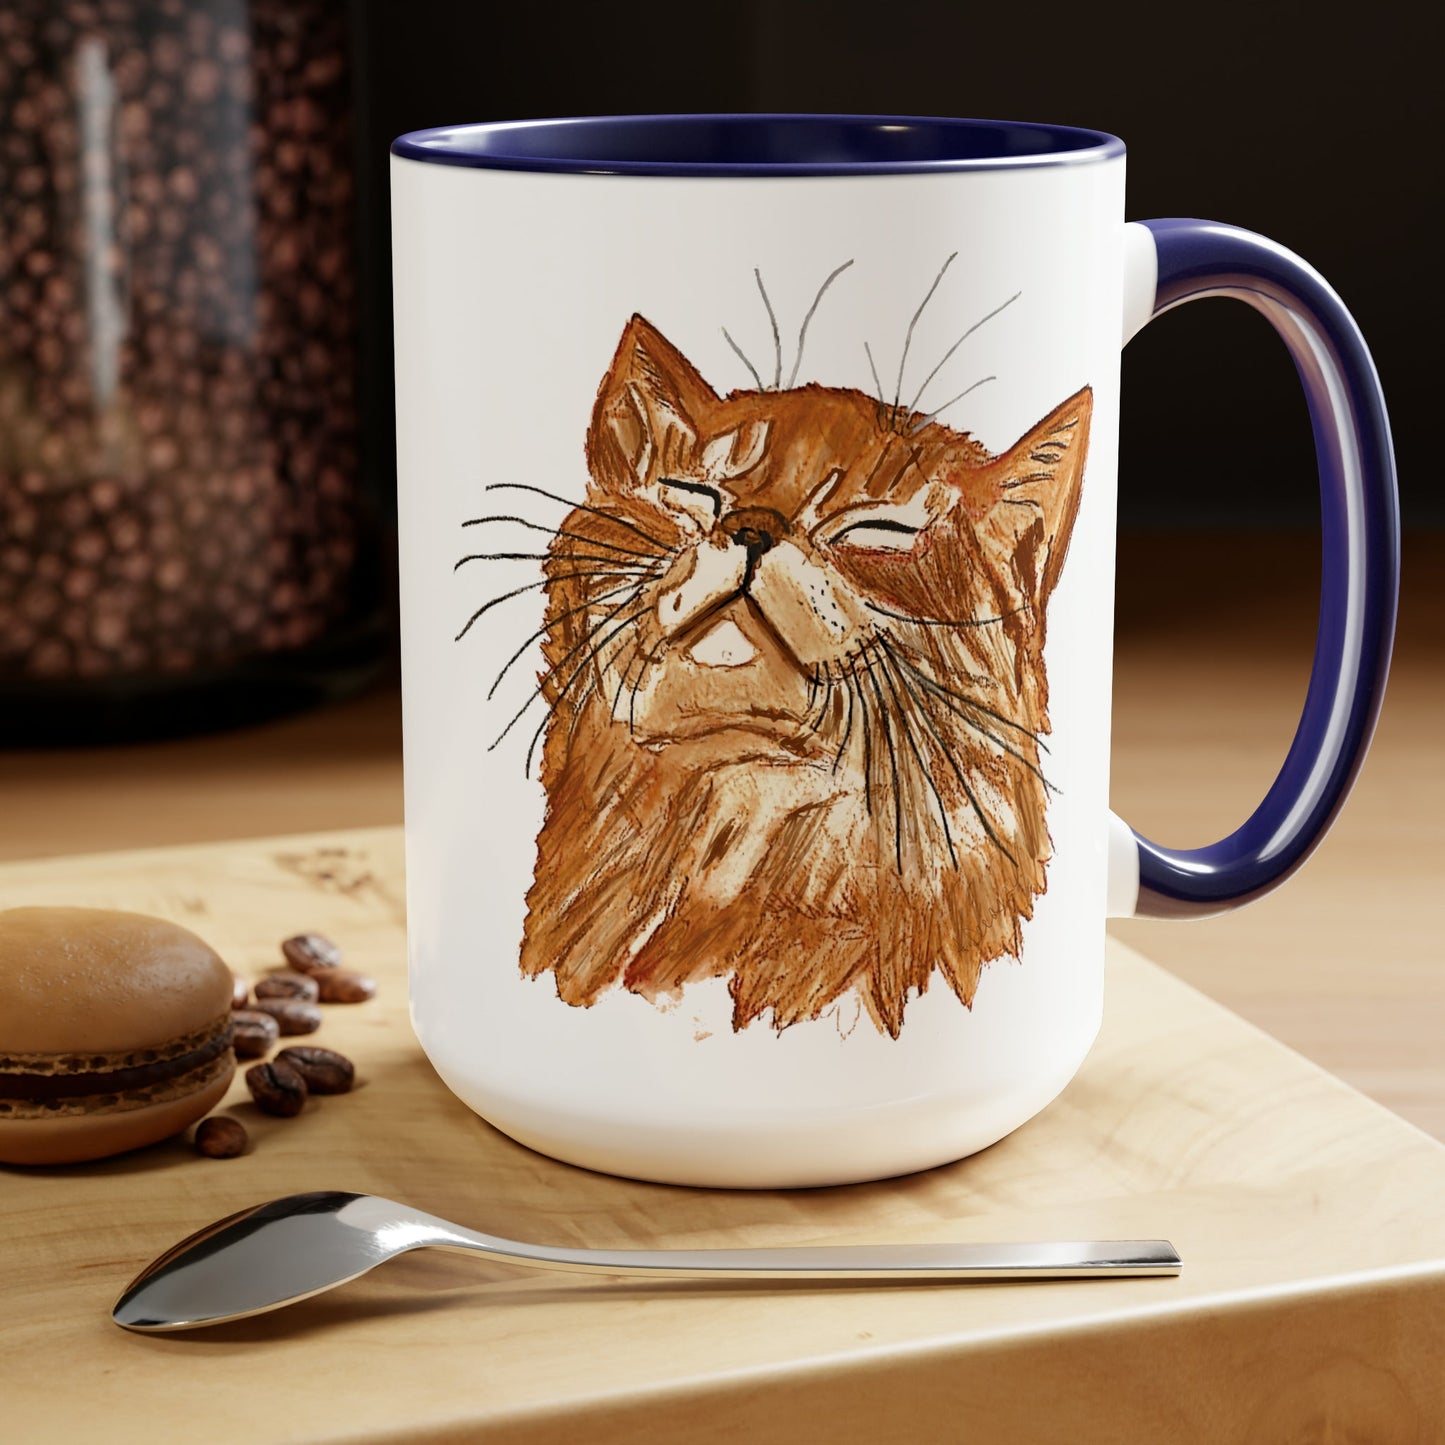 Watercolor Cat Two-Tone Coffee Mugs, 15oz (Four Colors available) - Blue Cava